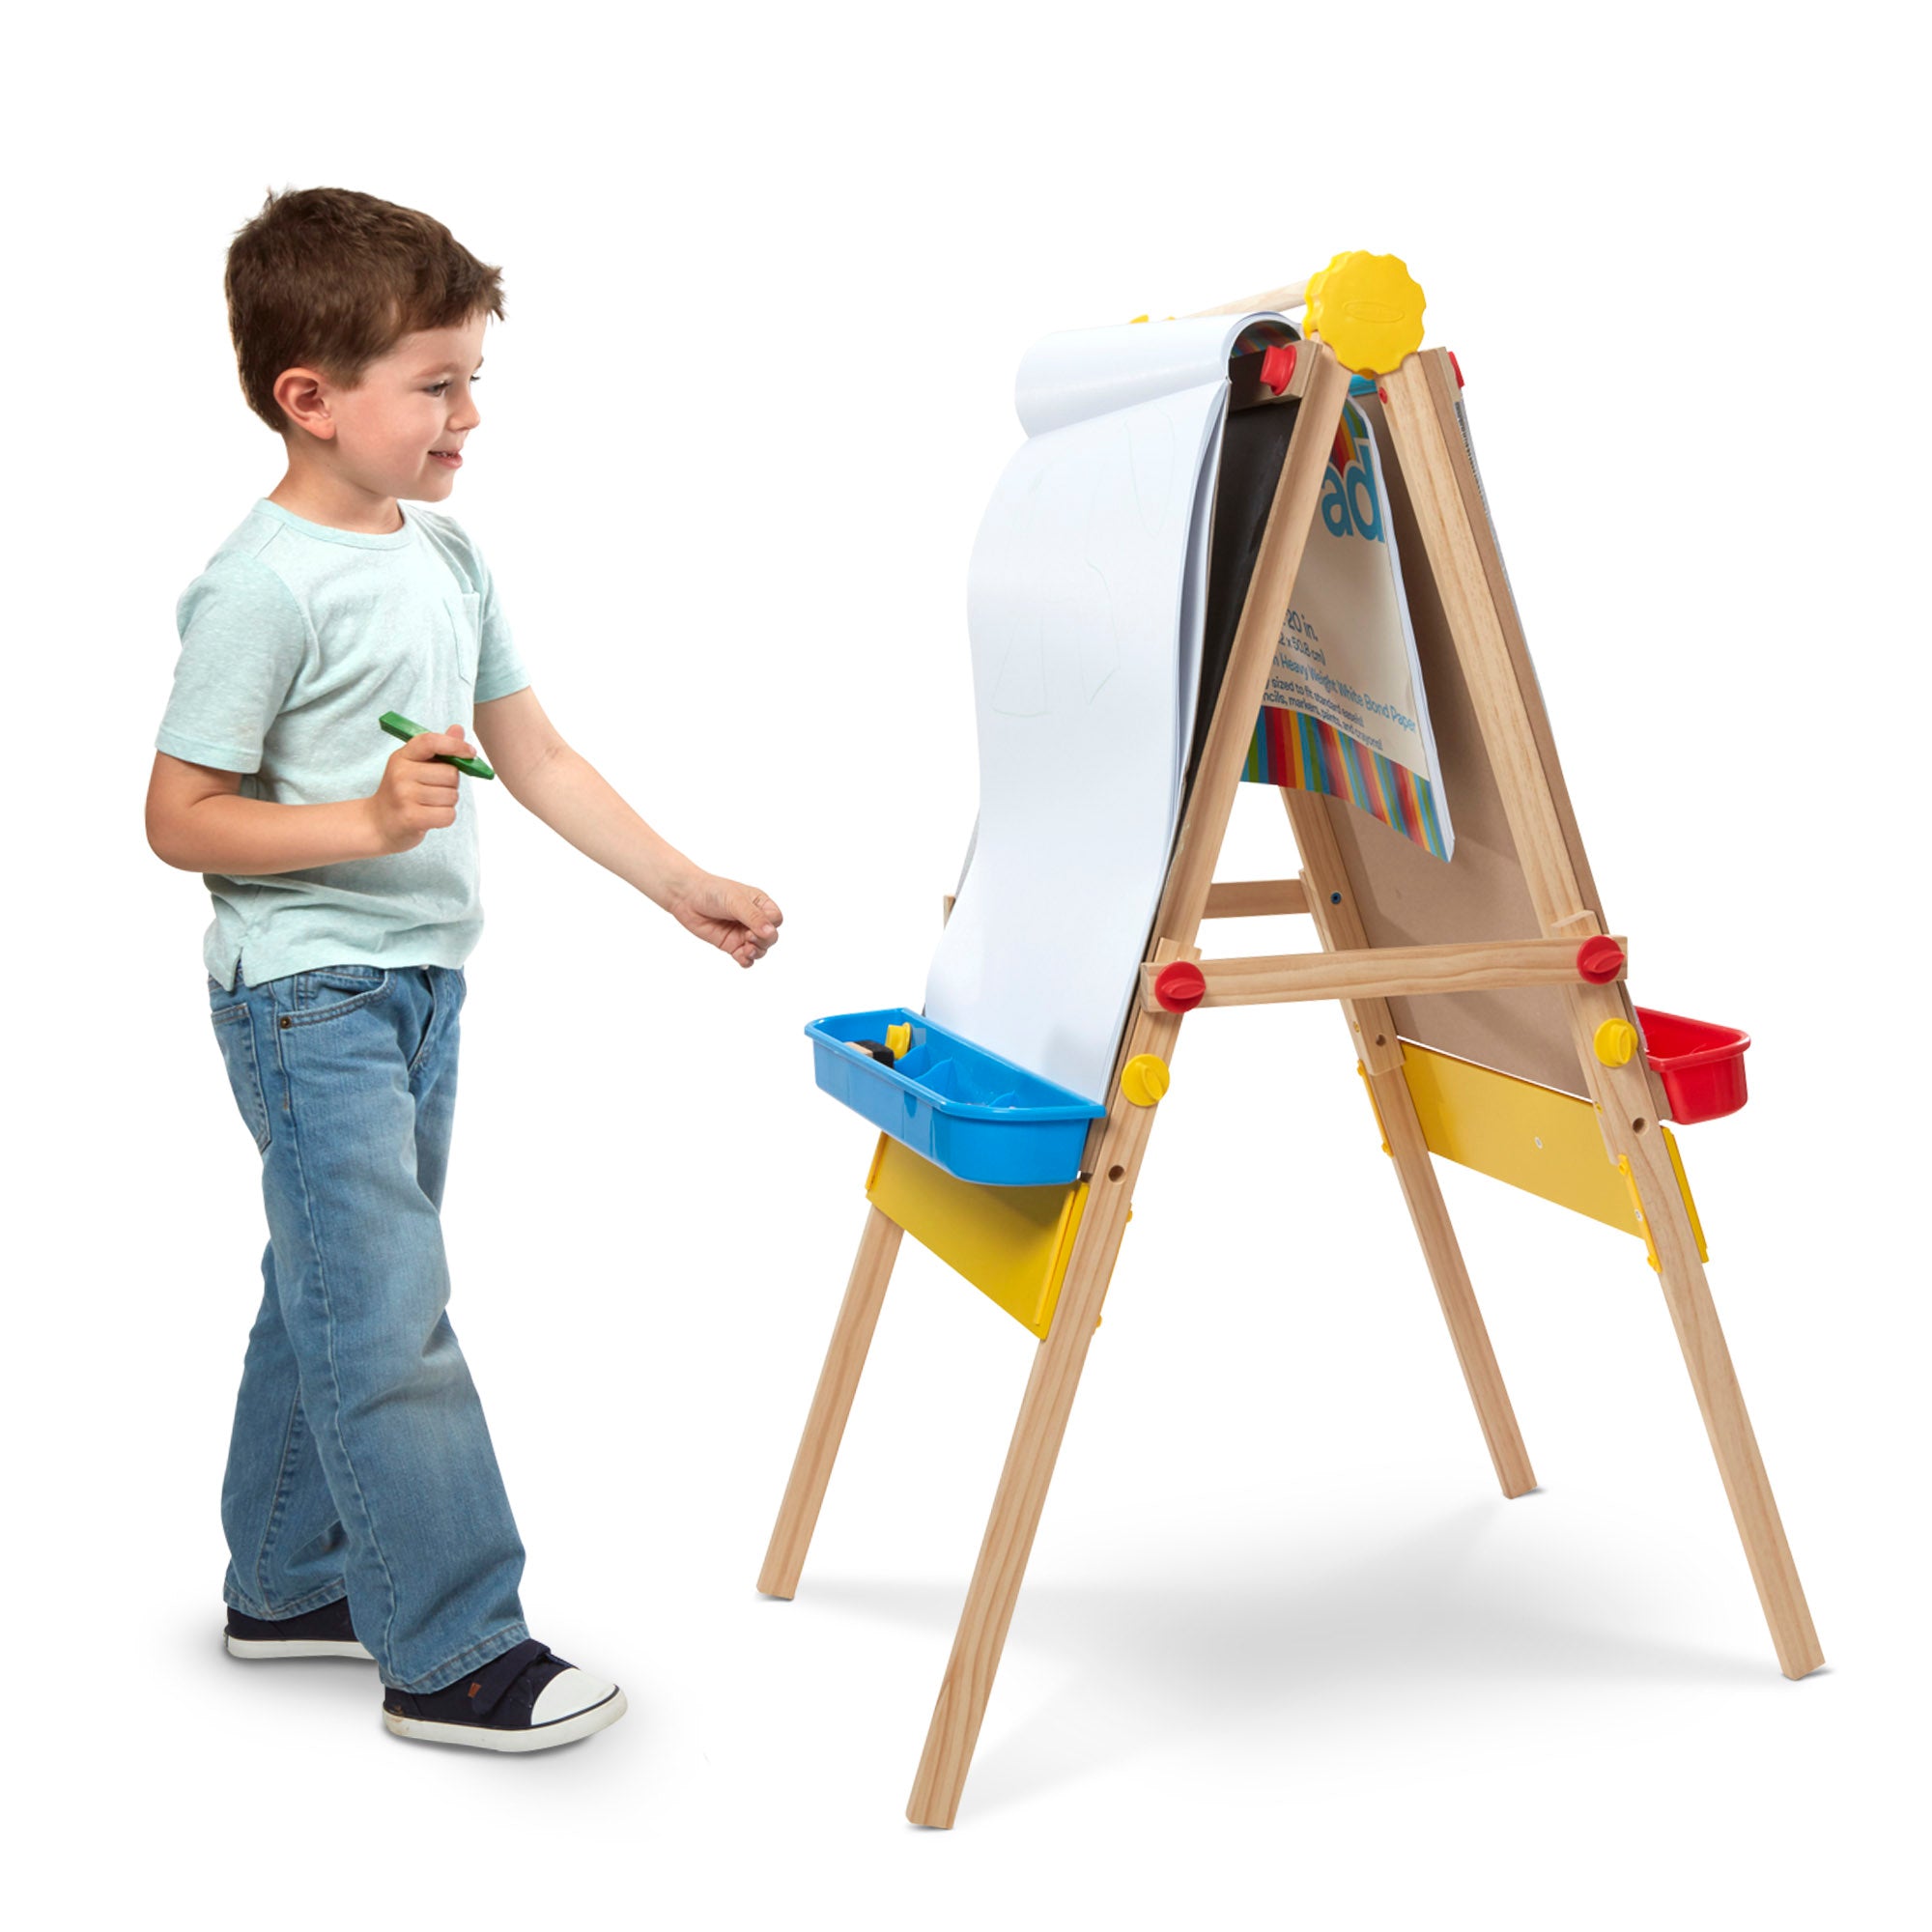 Easel Paper Pad